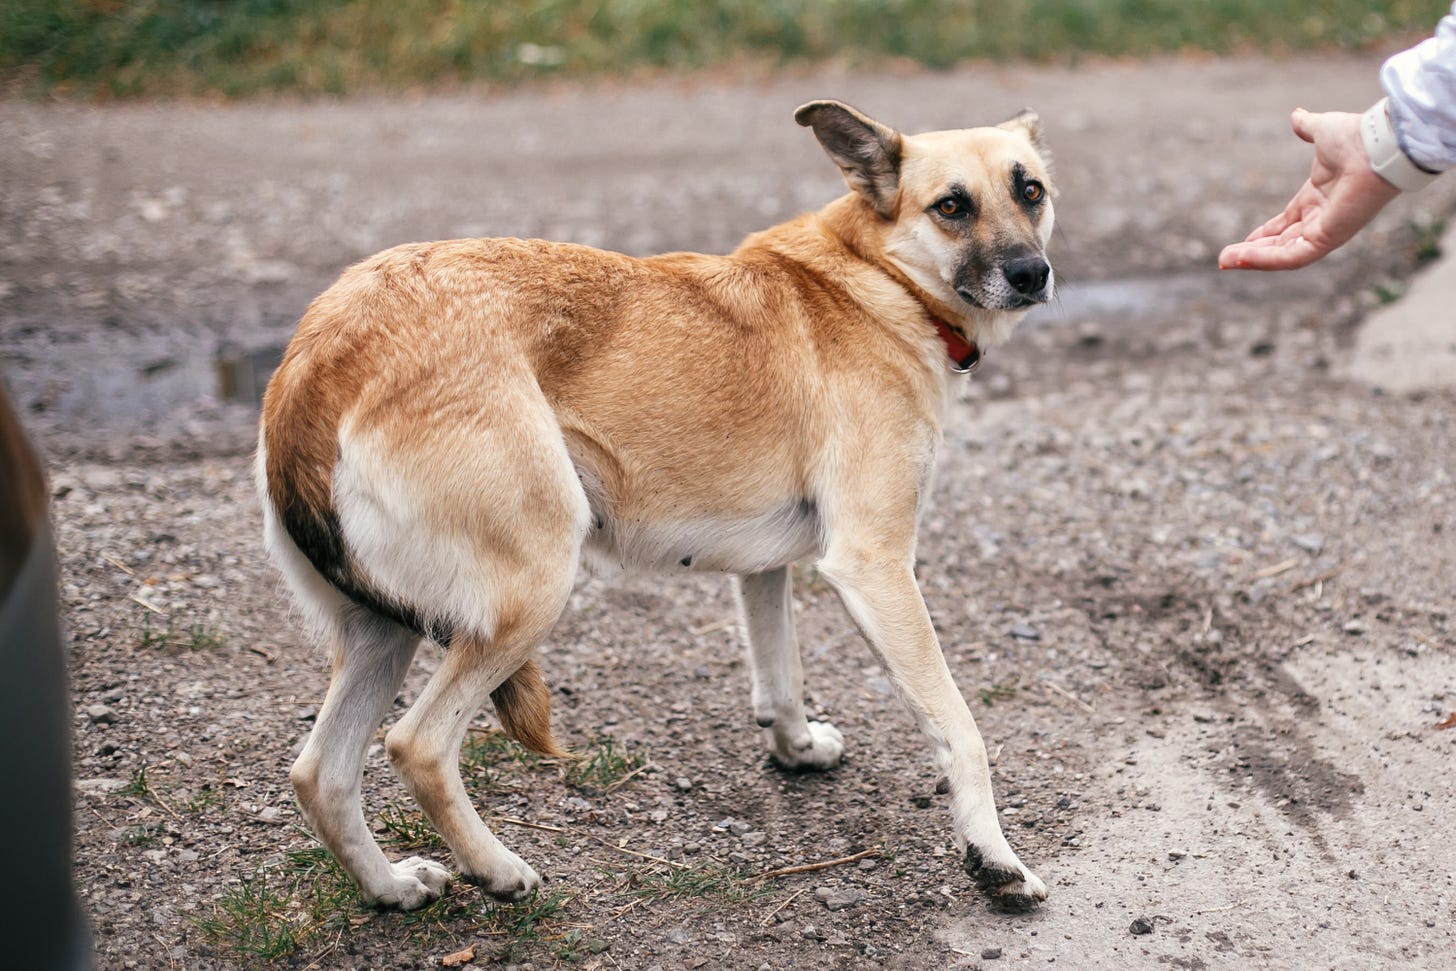 Tan larger dog with tail tucked, ears back, clearly afraid and a persons hand out trying to reach towards the frightened dog